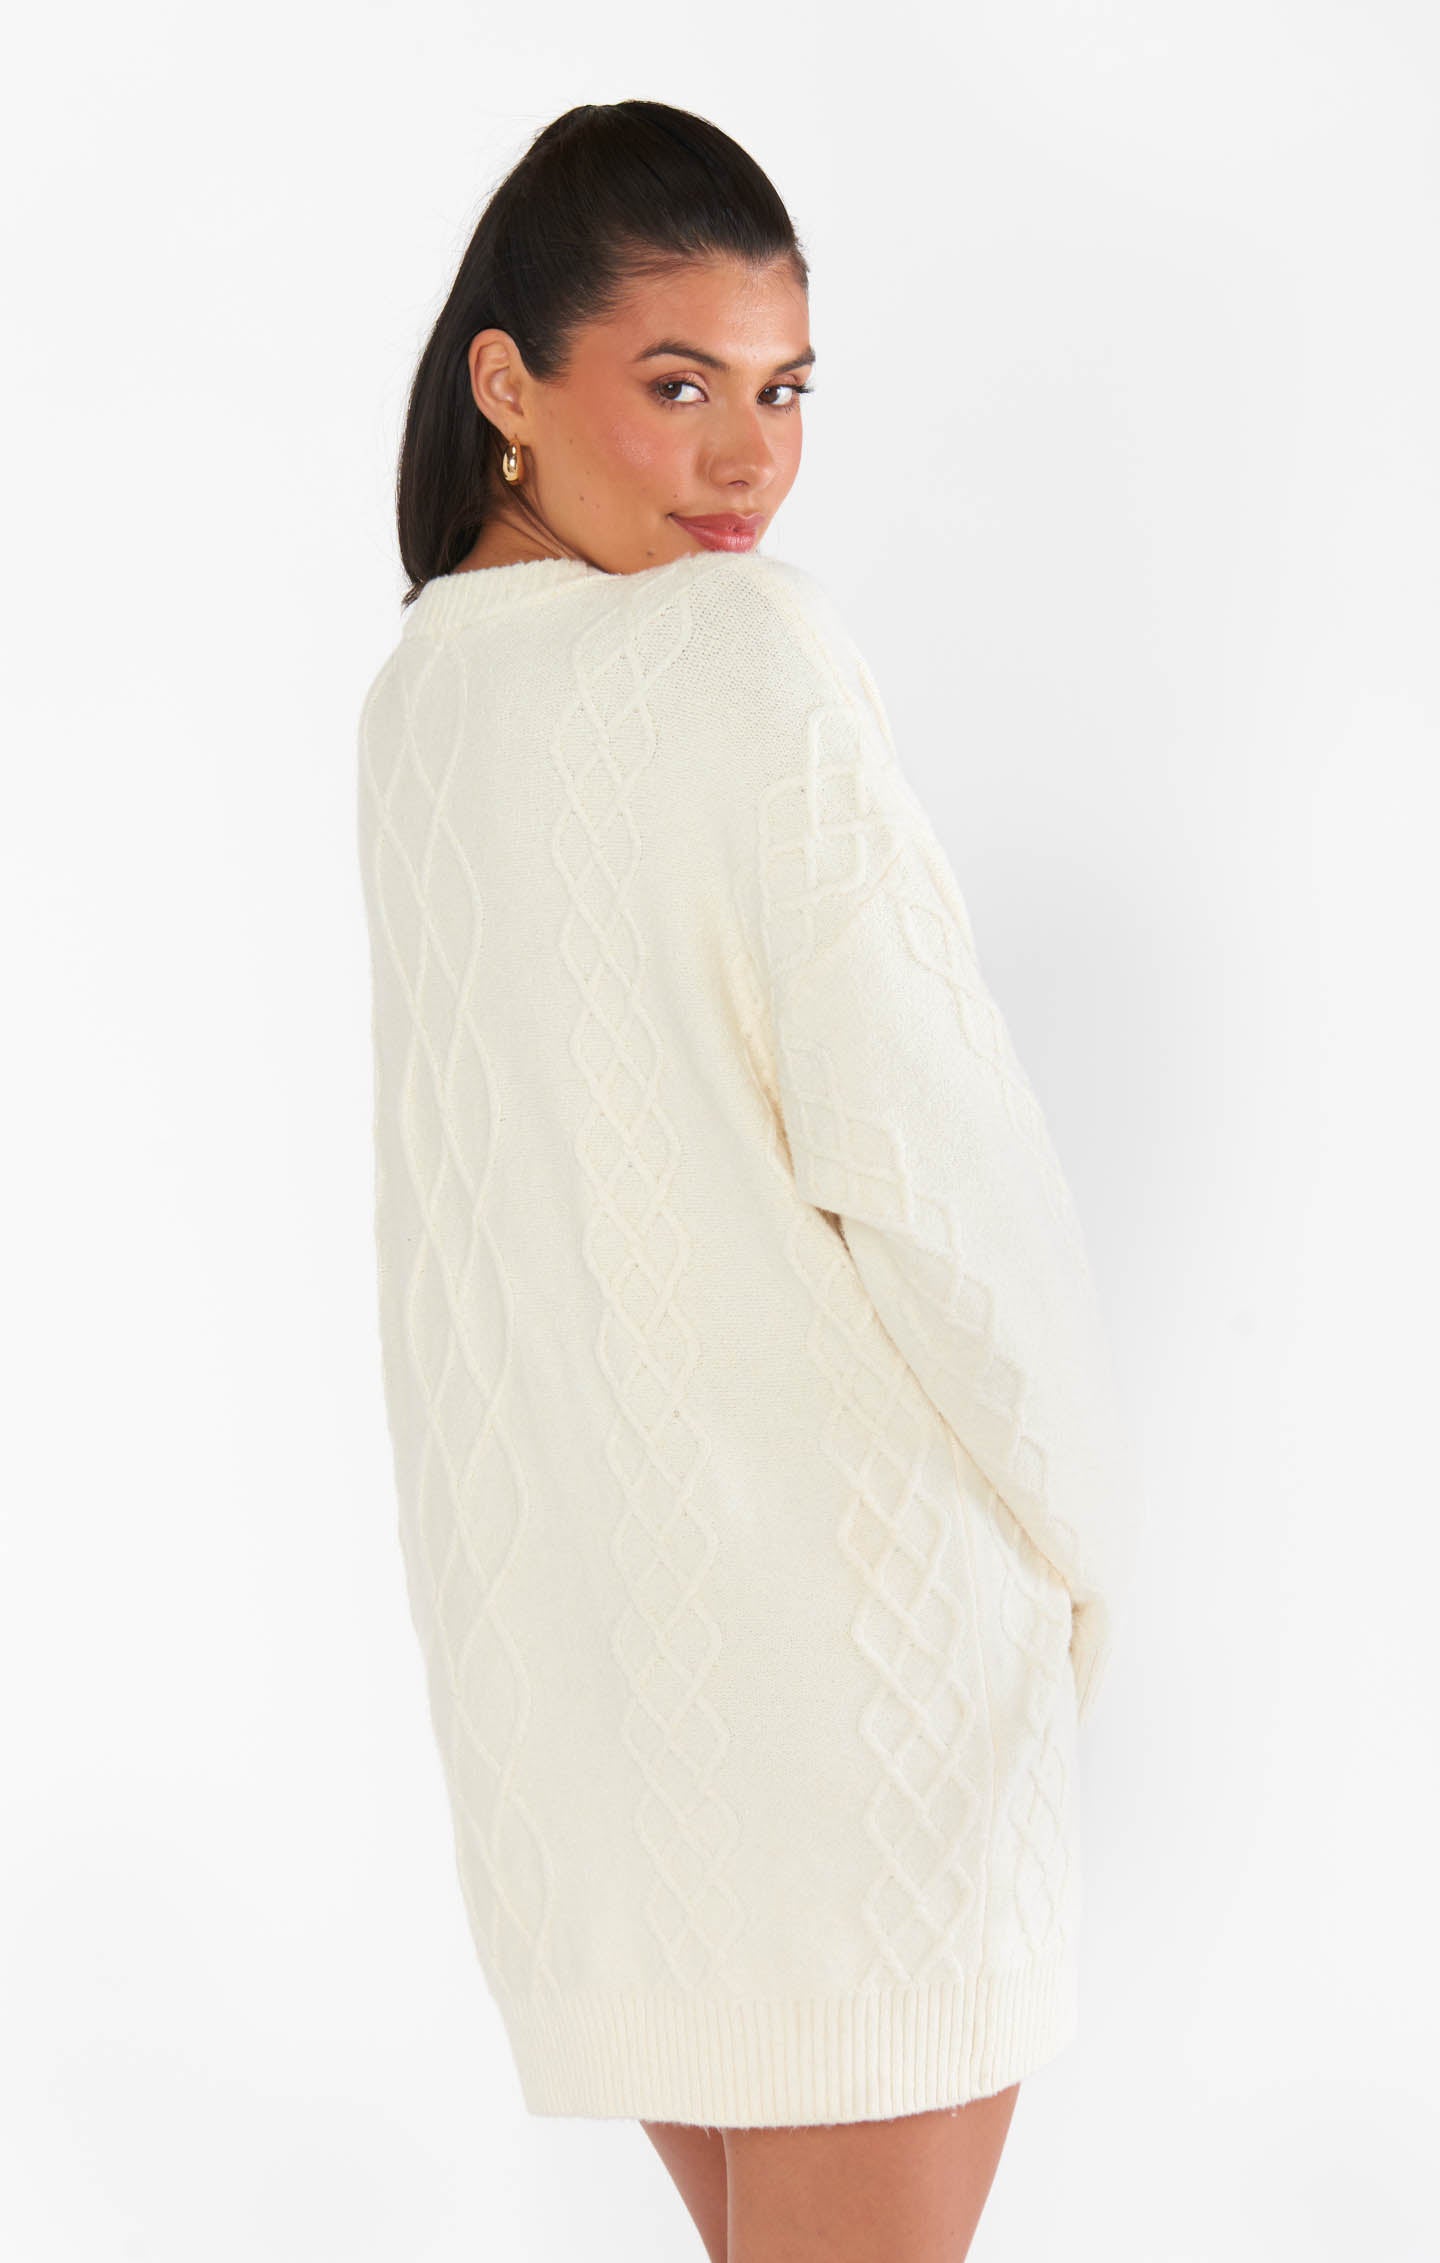 What You've Been Looking For Cream White Cable Knit Tunic – Shop the Mint